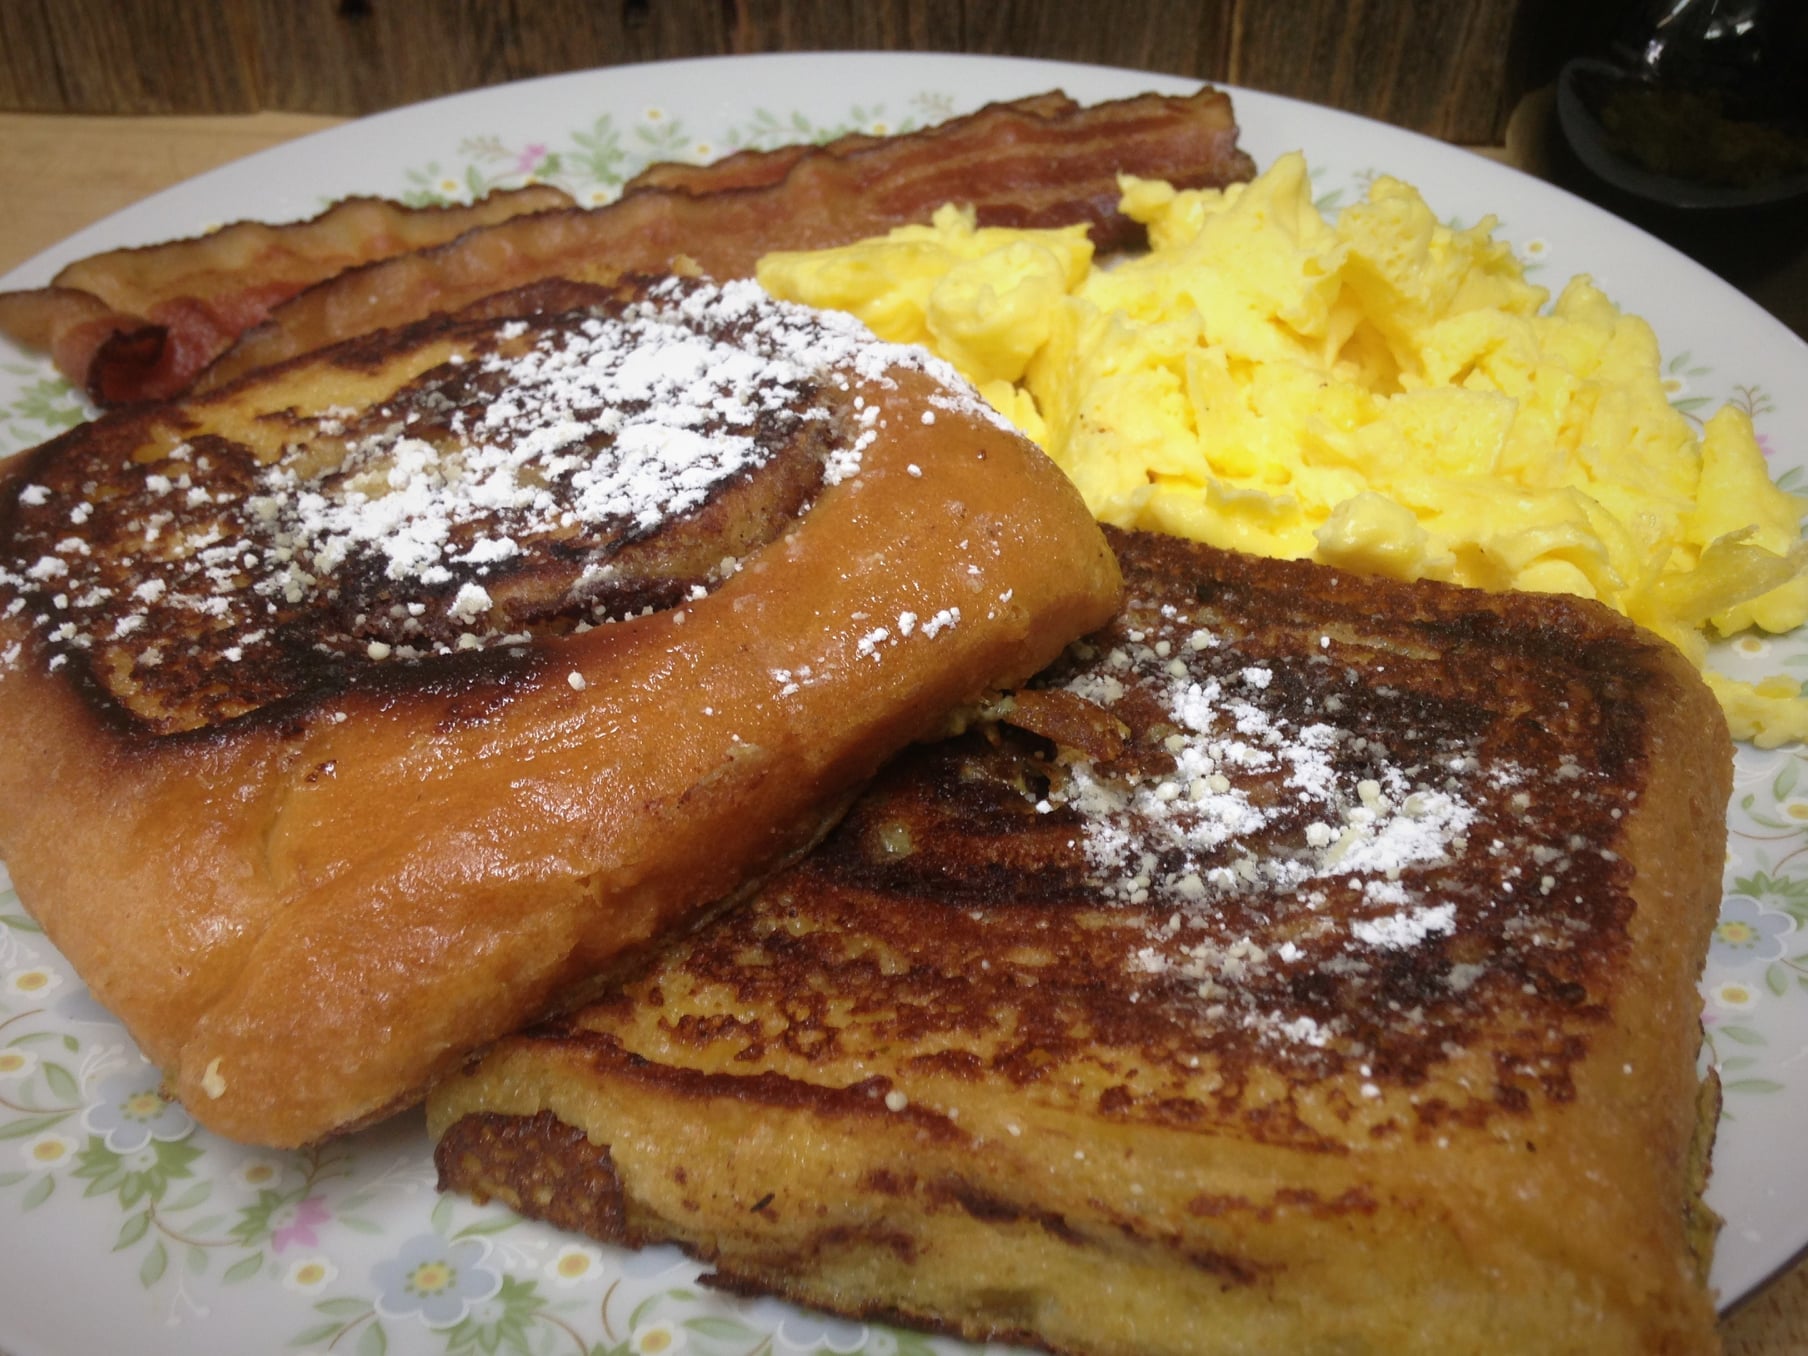 French toast, bacon and scramble eggs on a plate